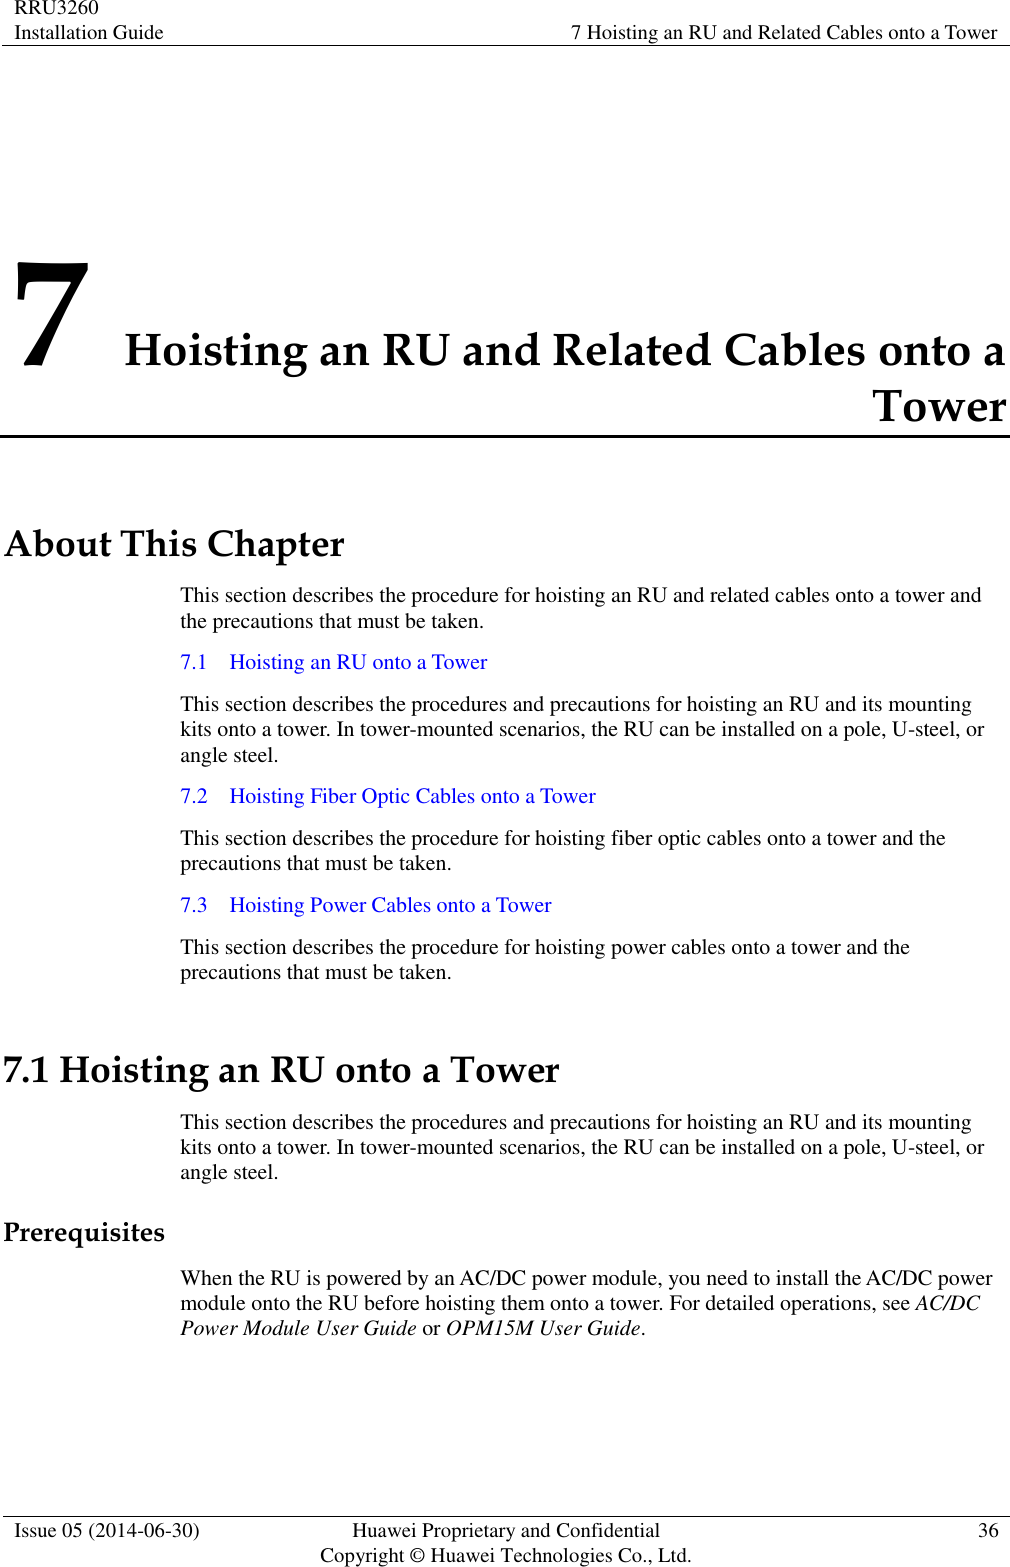 RRU3260 Installation Guide 7 Hoisting an RU and Related Cables onto a Tower  Issue 05 (2014-06-30) Huawei Proprietary and Confidential                                     Copyright © Huawei Technologies Co., Ltd. 36  7 Hoisting an RU and Related Cables onto a Tower About This Chapter This section describes the procedure for hoisting an RU and related cables onto a tower and the precautions that must be taken. 7.1    Hoisting an RU onto a Tower This section describes the procedures and precautions for hoisting an RU and its mounting kits onto a tower. In tower-mounted scenarios, the RU can be installed on a pole, U-steel, or angle steel. 7.2    Hoisting Fiber Optic Cables onto a Tower This section describes the procedure for hoisting fiber optic cables onto a tower and the precautions that must be taken. 7.3    Hoisting Power Cables onto a Tower This section describes the procedure for hoisting power cables onto a tower and the precautions that must be taken. 7.1 Hoisting an RU onto a Tower This section describes the procedures and precautions for hoisting an RU and its mounting kits onto a tower. In tower-mounted scenarios, the RU can be installed on a pole, U-steel, or angle steel. Prerequisites When the RU is powered by an AC/DC power module, you need to install the AC/DC power module onto the RU before hoisting them onto a tower. For detailed operations, see AC/DC Power Module User Guide or OPM15M User Guide.  